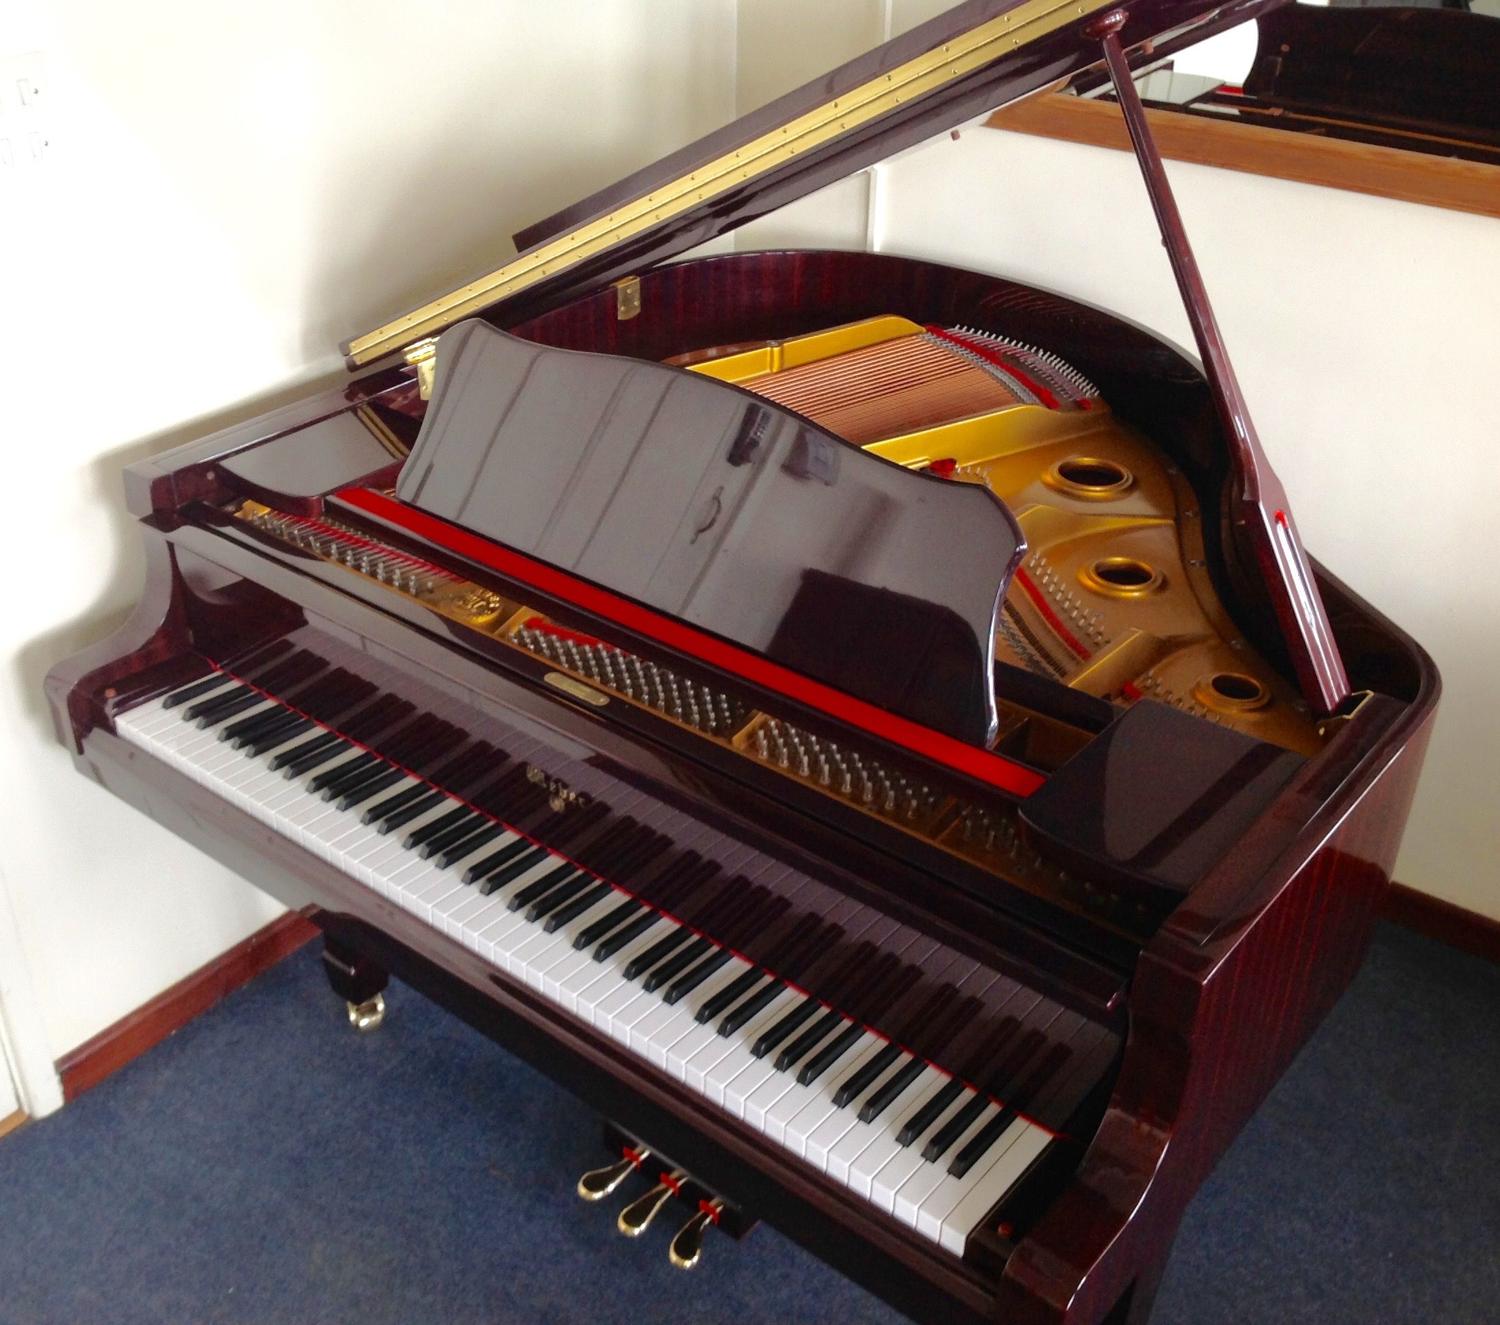 WEBER Baby Grand piano for sale(REDUCED)